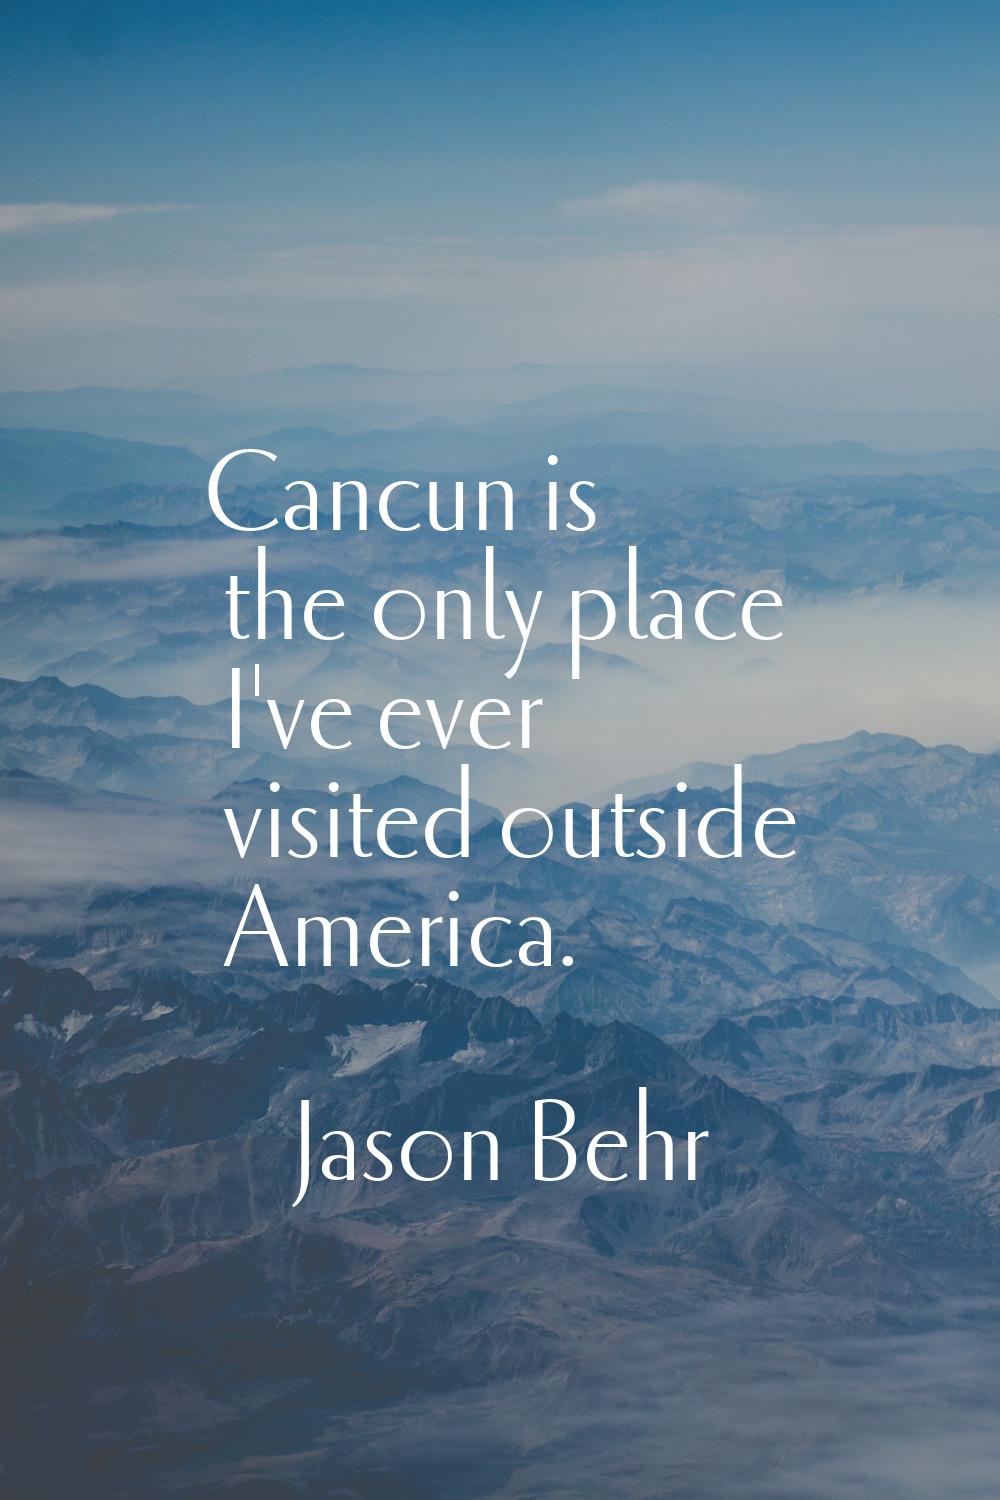 Cancun is the only place I've ever visited outside America.